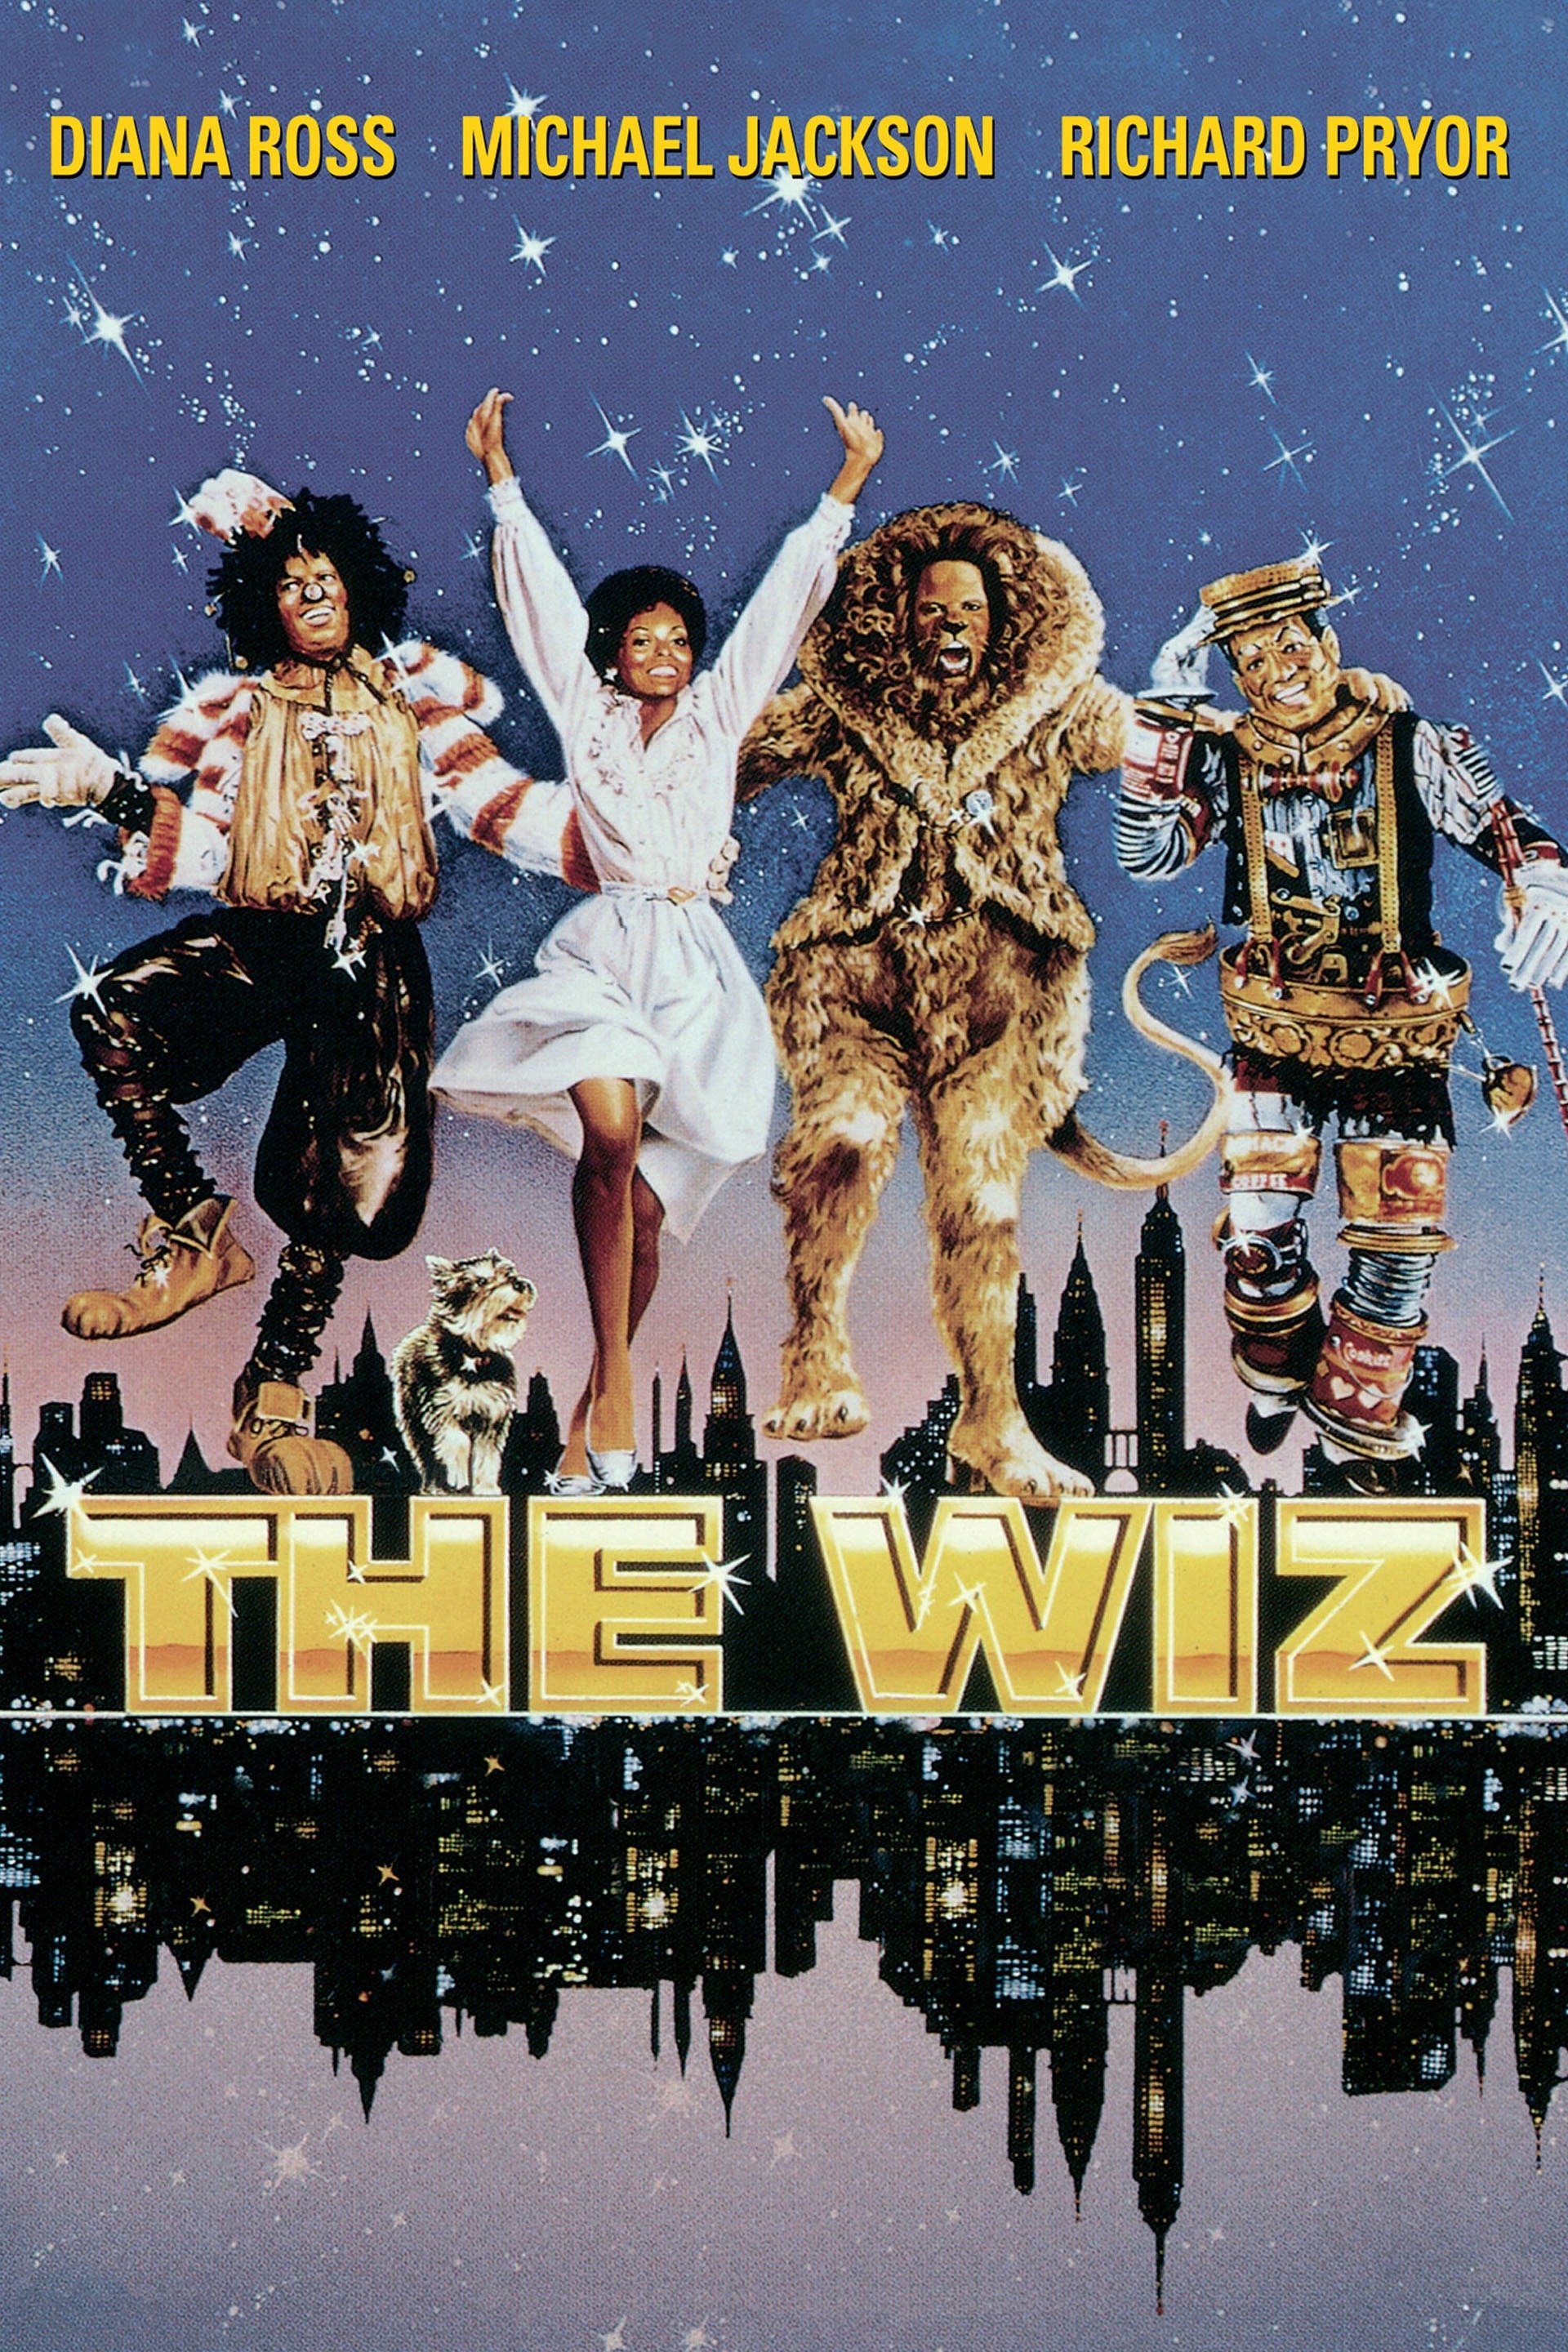 the wiz movie poster